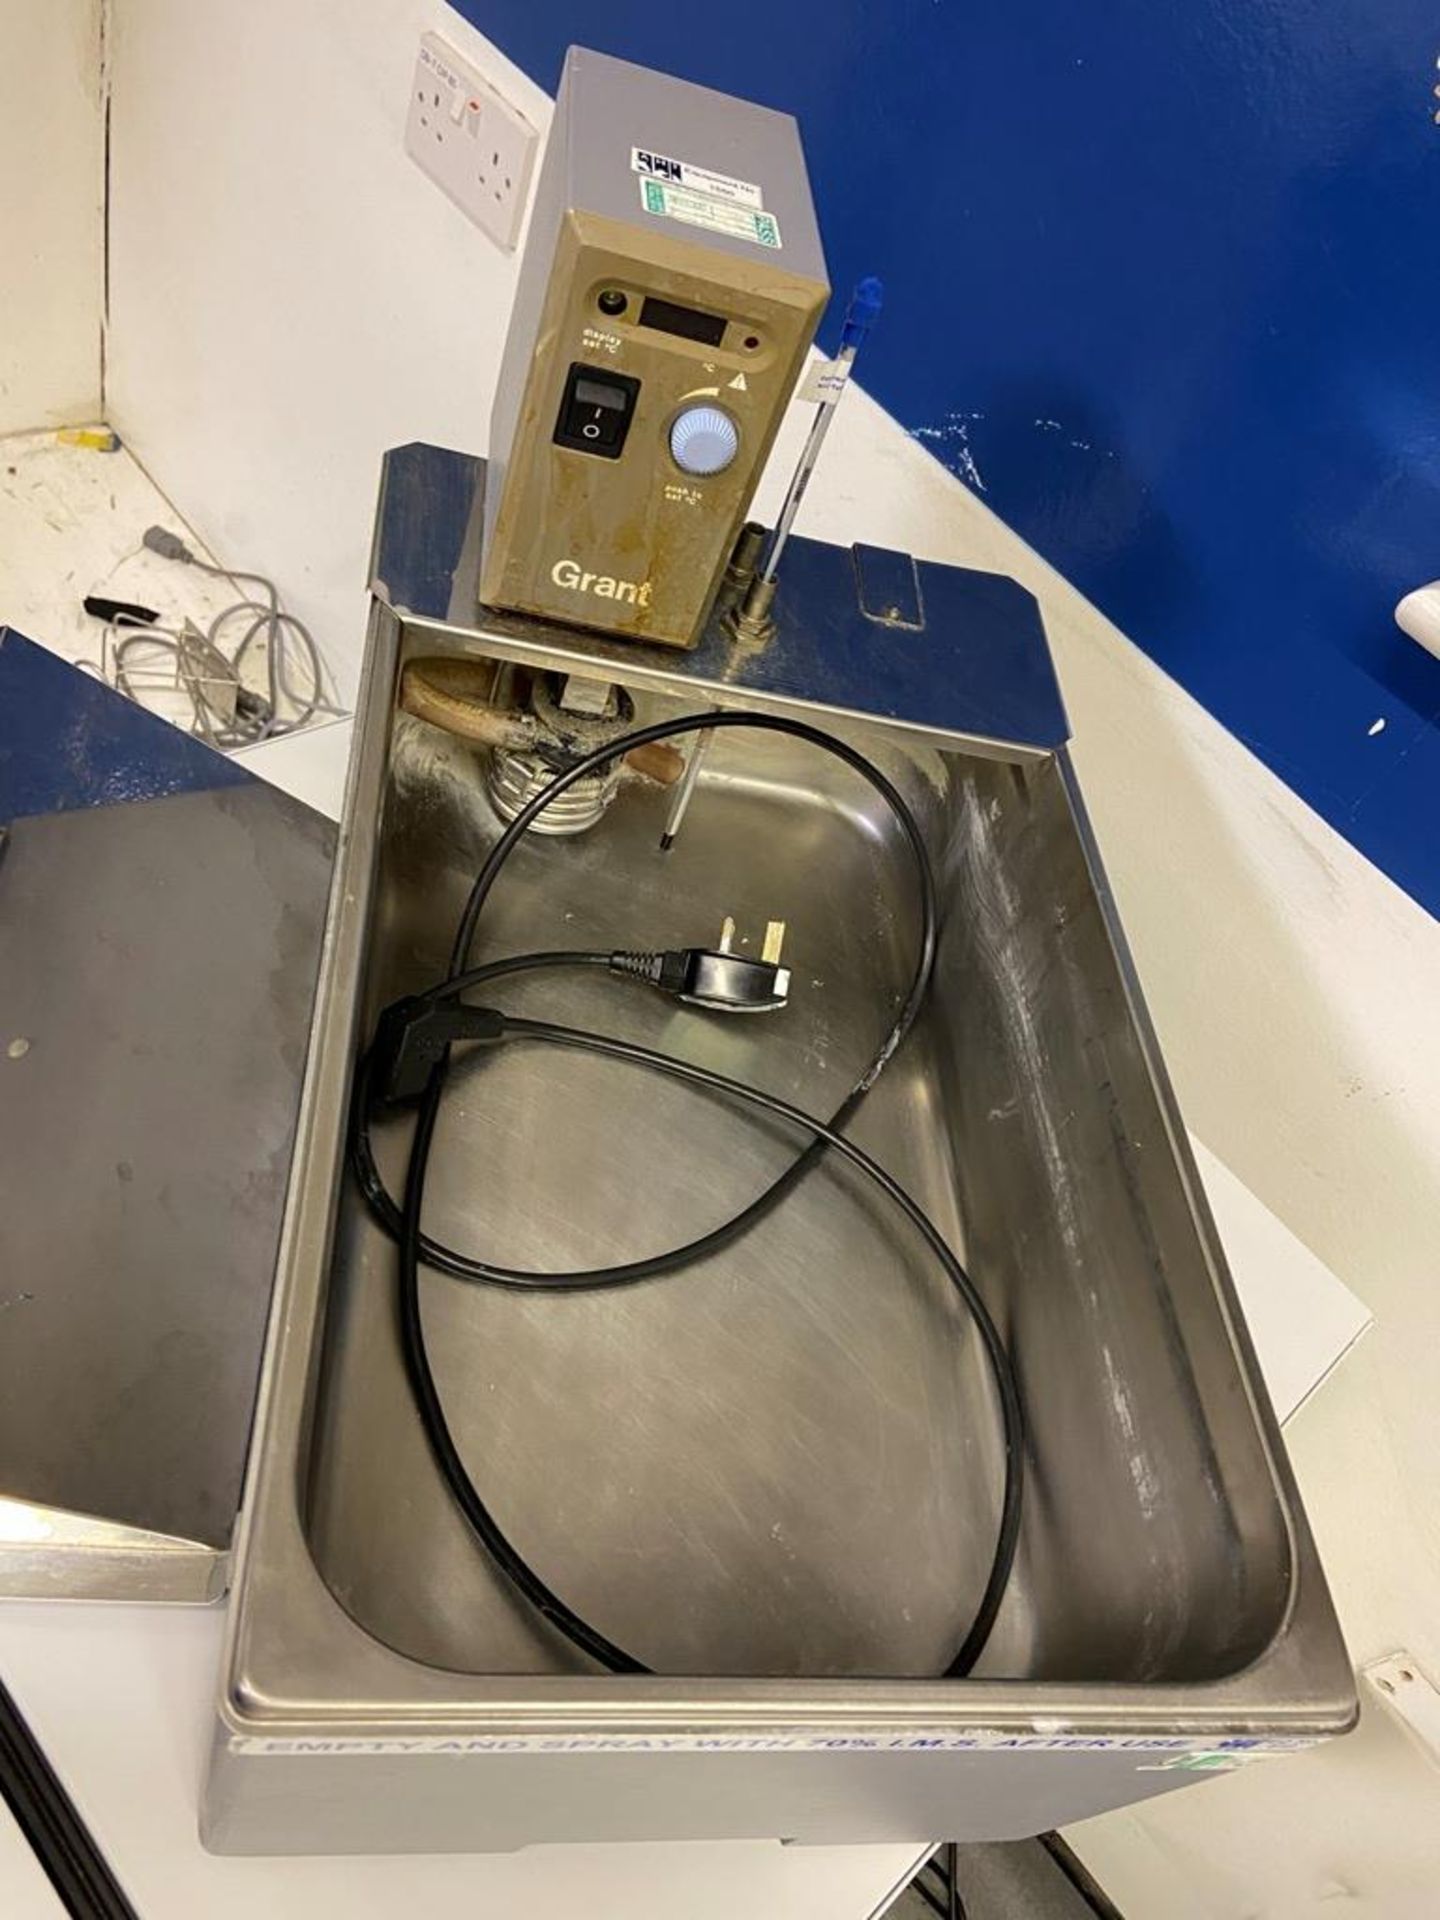 Grant water bath with heating element/control, lid and 240v power lead - Image 2 of 2